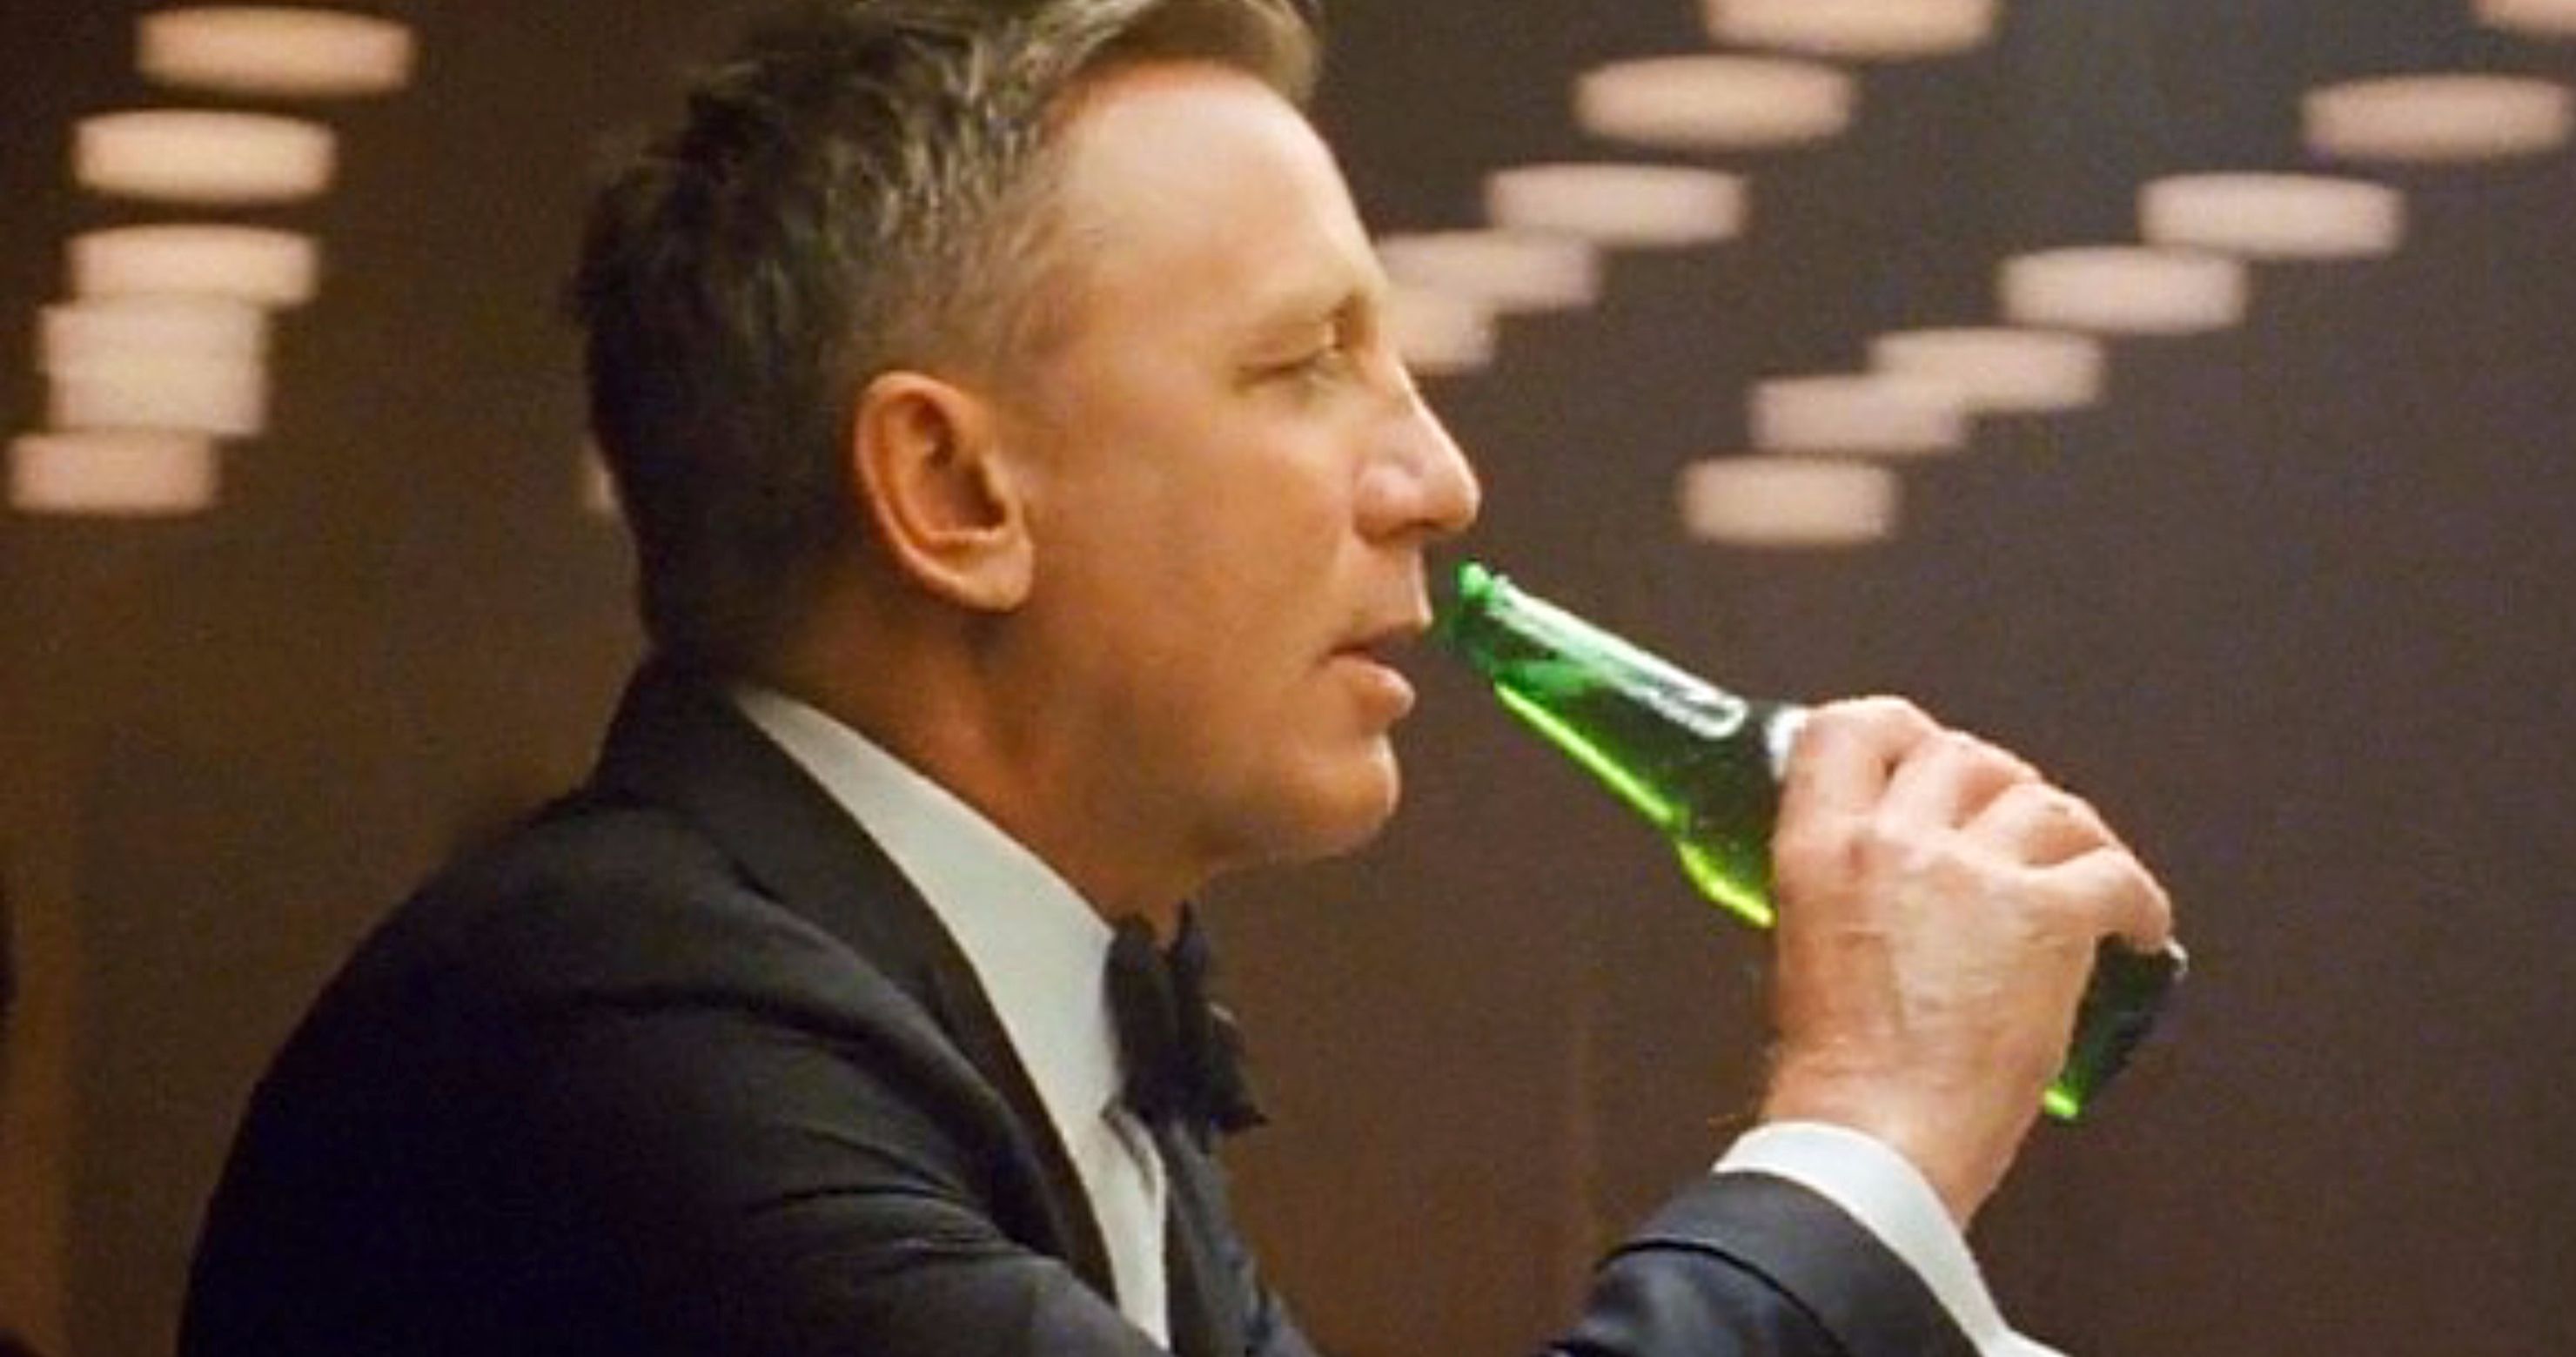 James Bond Switches to Non-Alcoholic Beer in No Time to Die Heineken Commercial